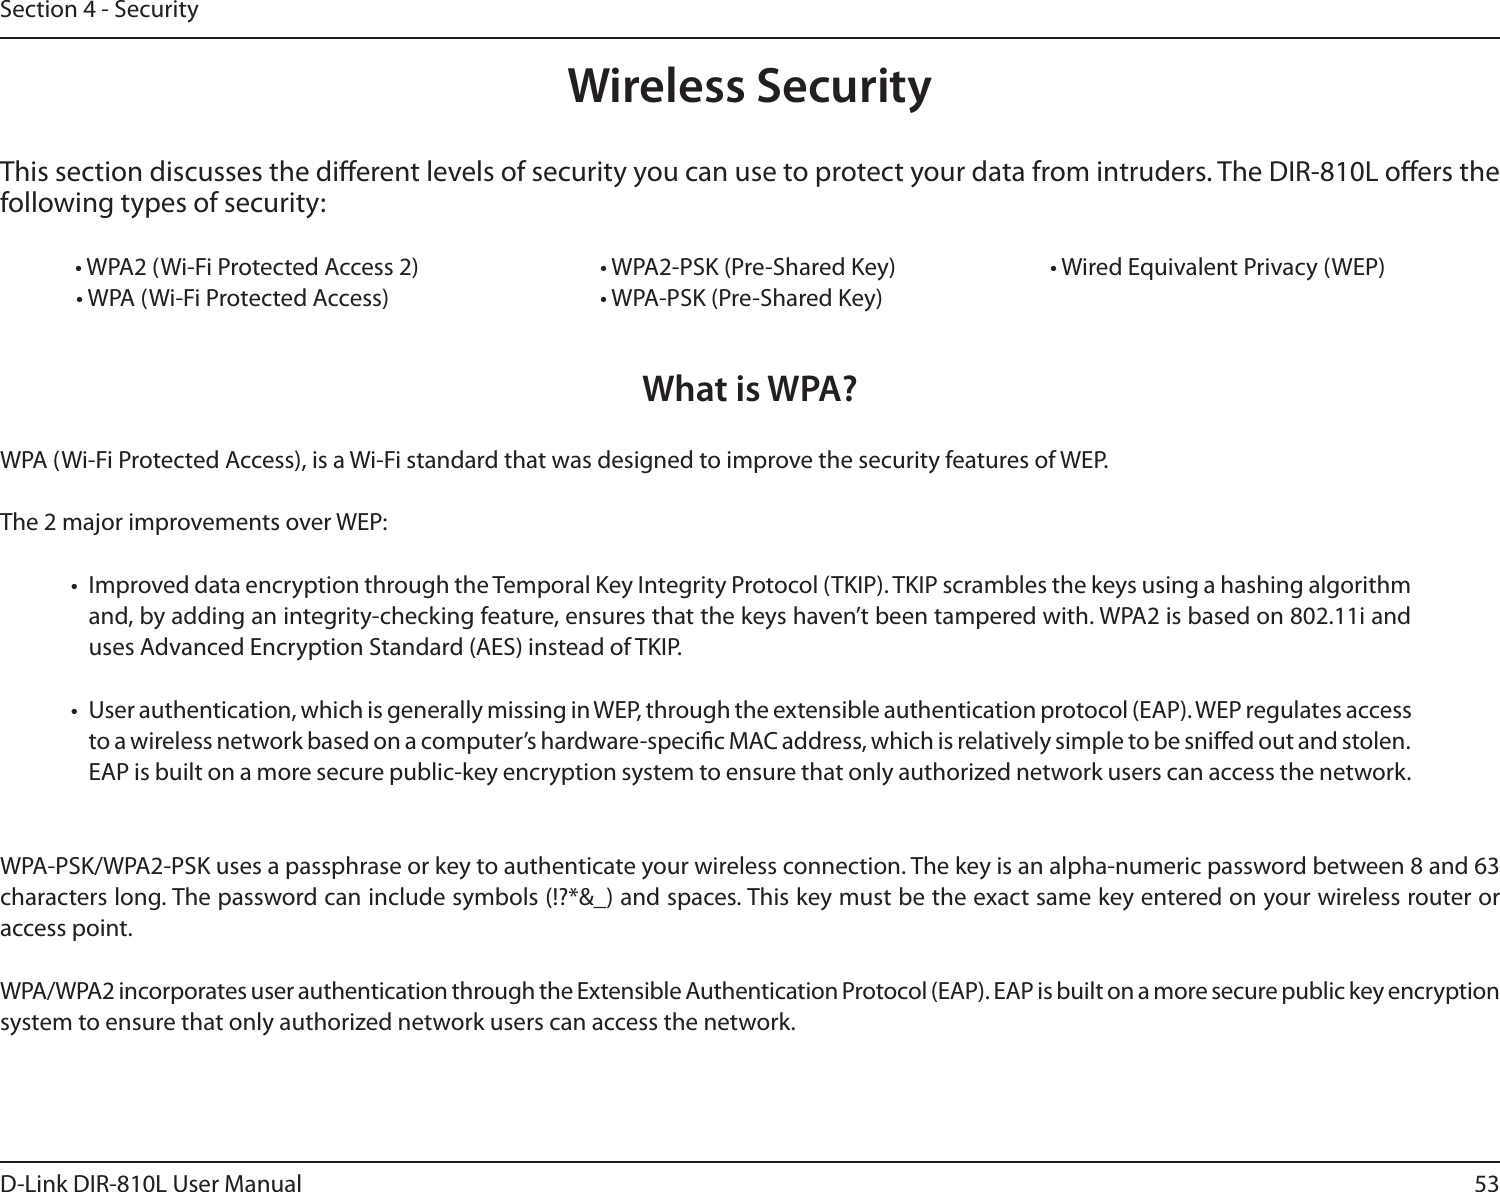 53D-Link DIR-810L User ManualSection 4 - SecurityWireless SecurityThis section discusses the dierent levels of security you can use to protect your data from intruders. The DIR-810L oers the following types of security:  • WPA2 (Wi-Fi Protected Access 2)       • WPA2-PSK (Pre-Shared Key)     • Wired Equivalent Privacy (WEP) • WPA (Wi-Fi Protected Access)      • WPA-PSK (Pre-Shared Key)What is WPA?WPA (Wi-Fi Protected Access), is a Wi-Fi standard that was designed to improve the security features of WEP.  The 2 major improvements over WEP: •  Improved data encryption through the Temporal Key Integrity Protocol (TKIP). TKIP scrambles the keys using a hashing algorithm and, by adding an integrity-checking feature, ensures that the keys haven’t been tampered with. WPA2 is based on 802.11i and uses Advanced Encryption Standard (AES) instead of TKIP.•  User authentication, which is generally missing in WEP, through the extensible authentication protocol (EAP). WEP regulates access to a wireless network based on a computer’s hardware-specic MAC address, which is relatively simple to be snied out and stolen. EAP is built on a more secure public-key encryption system to ensure that only authorized network users can access the network.WPA-PSK/WPA2-PSK uses a passphrase or key to authenticate your wireless connection. The key is an alpha-numeric password between 8 and 63 characters long. The password can include symbols (!?*&amp;_) and spaces. This key must be the exact same key entered on your wireless router or access point.WPA/WPA2 incorporates user authentication through the Extensible Authentication Protocol (EAP). EAP is built on a more secure public key encryption system to ensure that only authorized network users can access the network.